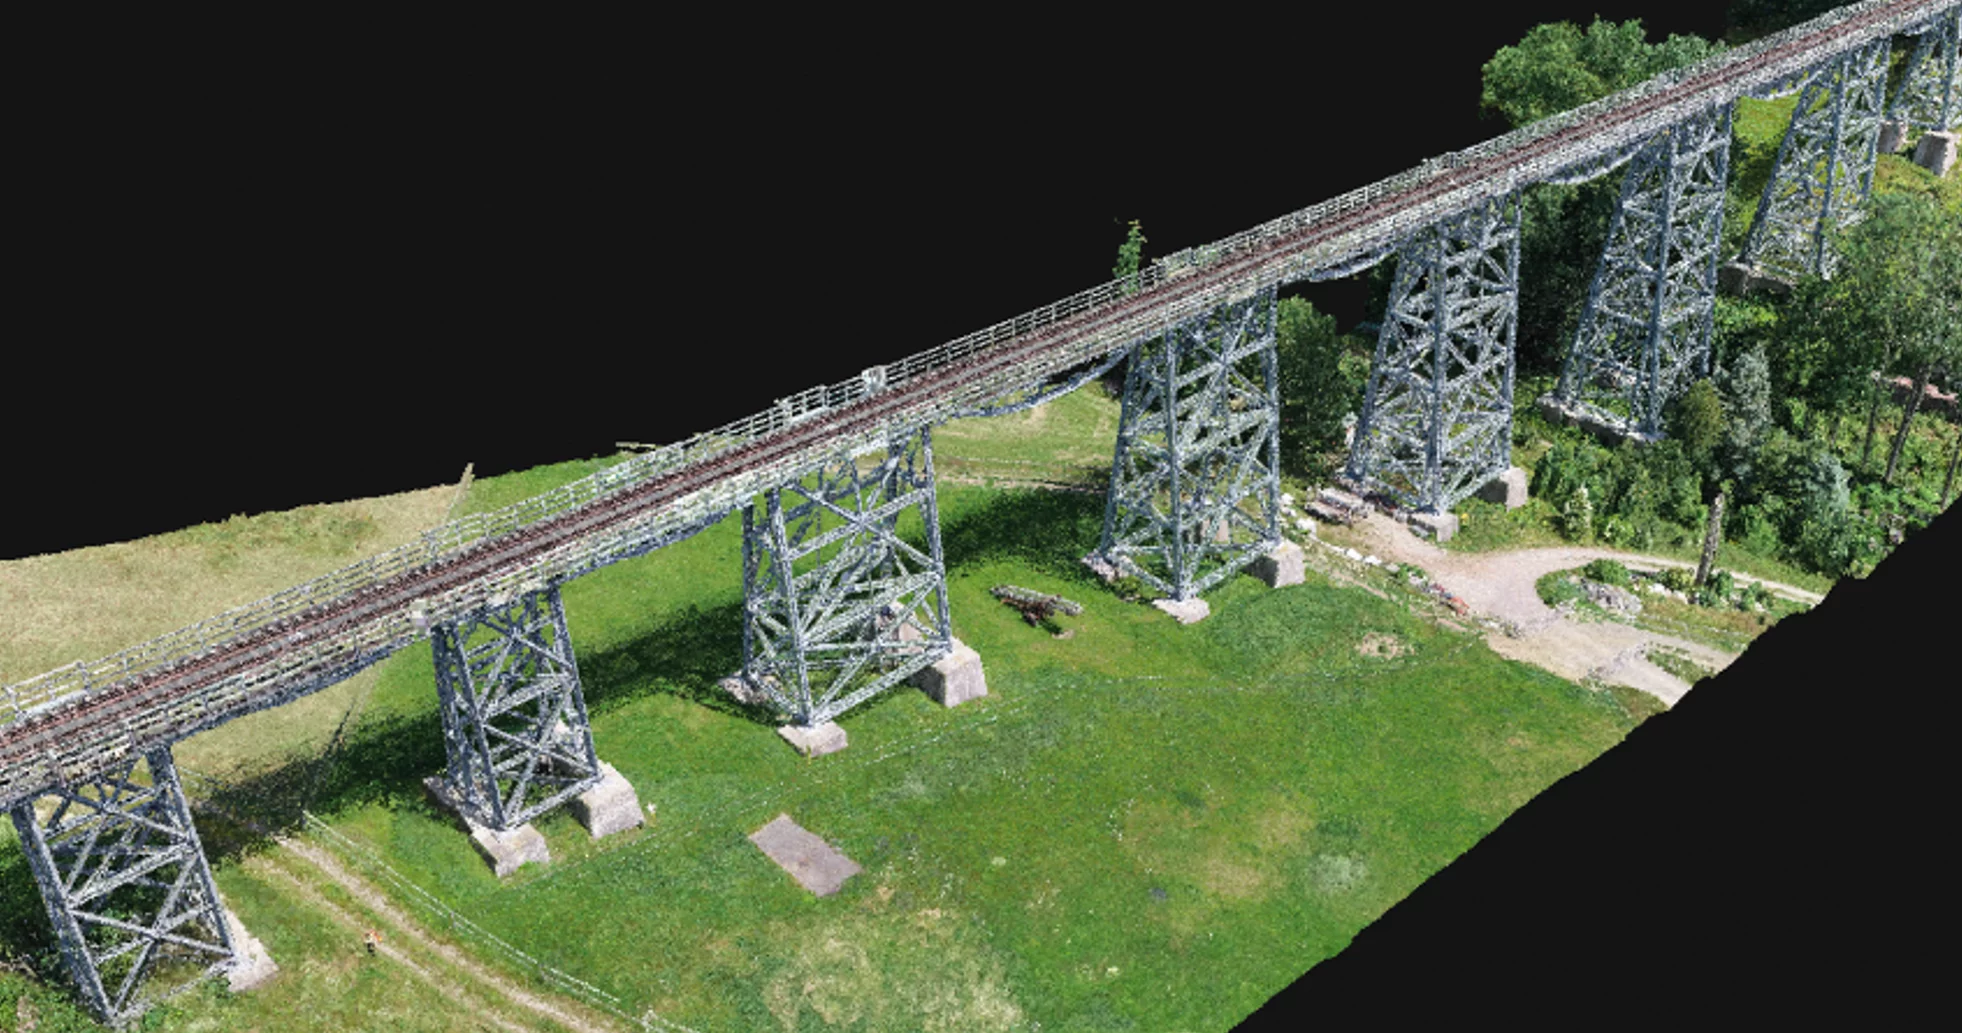 Data analysis and refinement - 3D point clouds